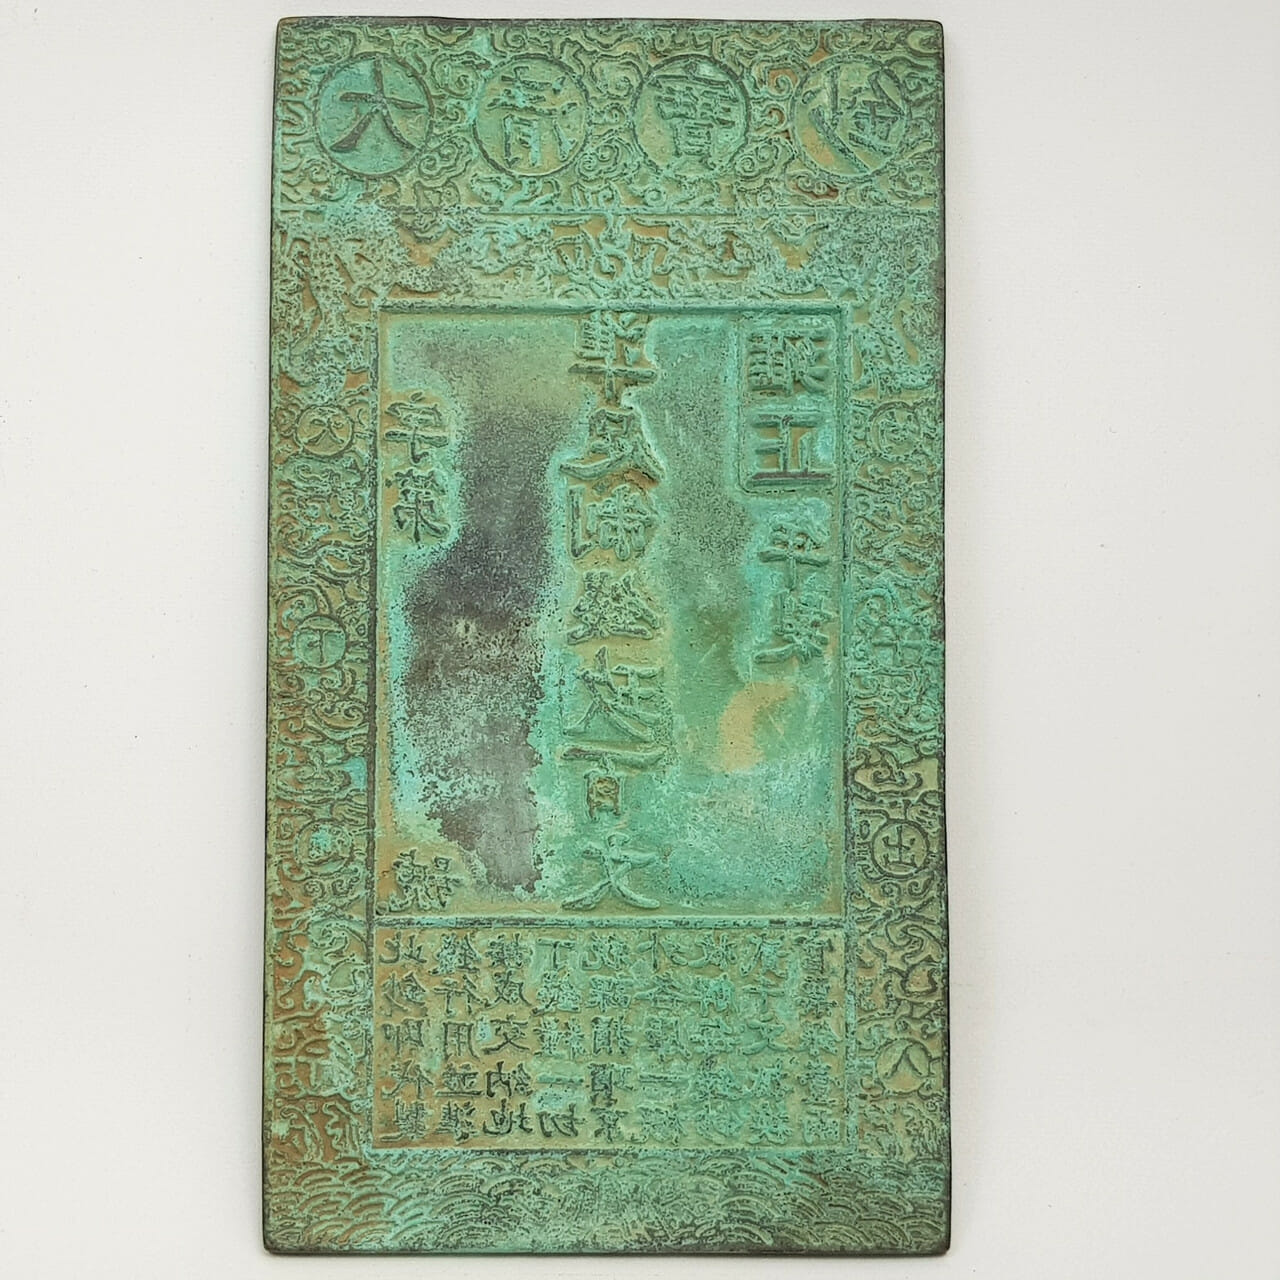 Up for sale we have a CHINESE METAL SEAL / STAMP #51522